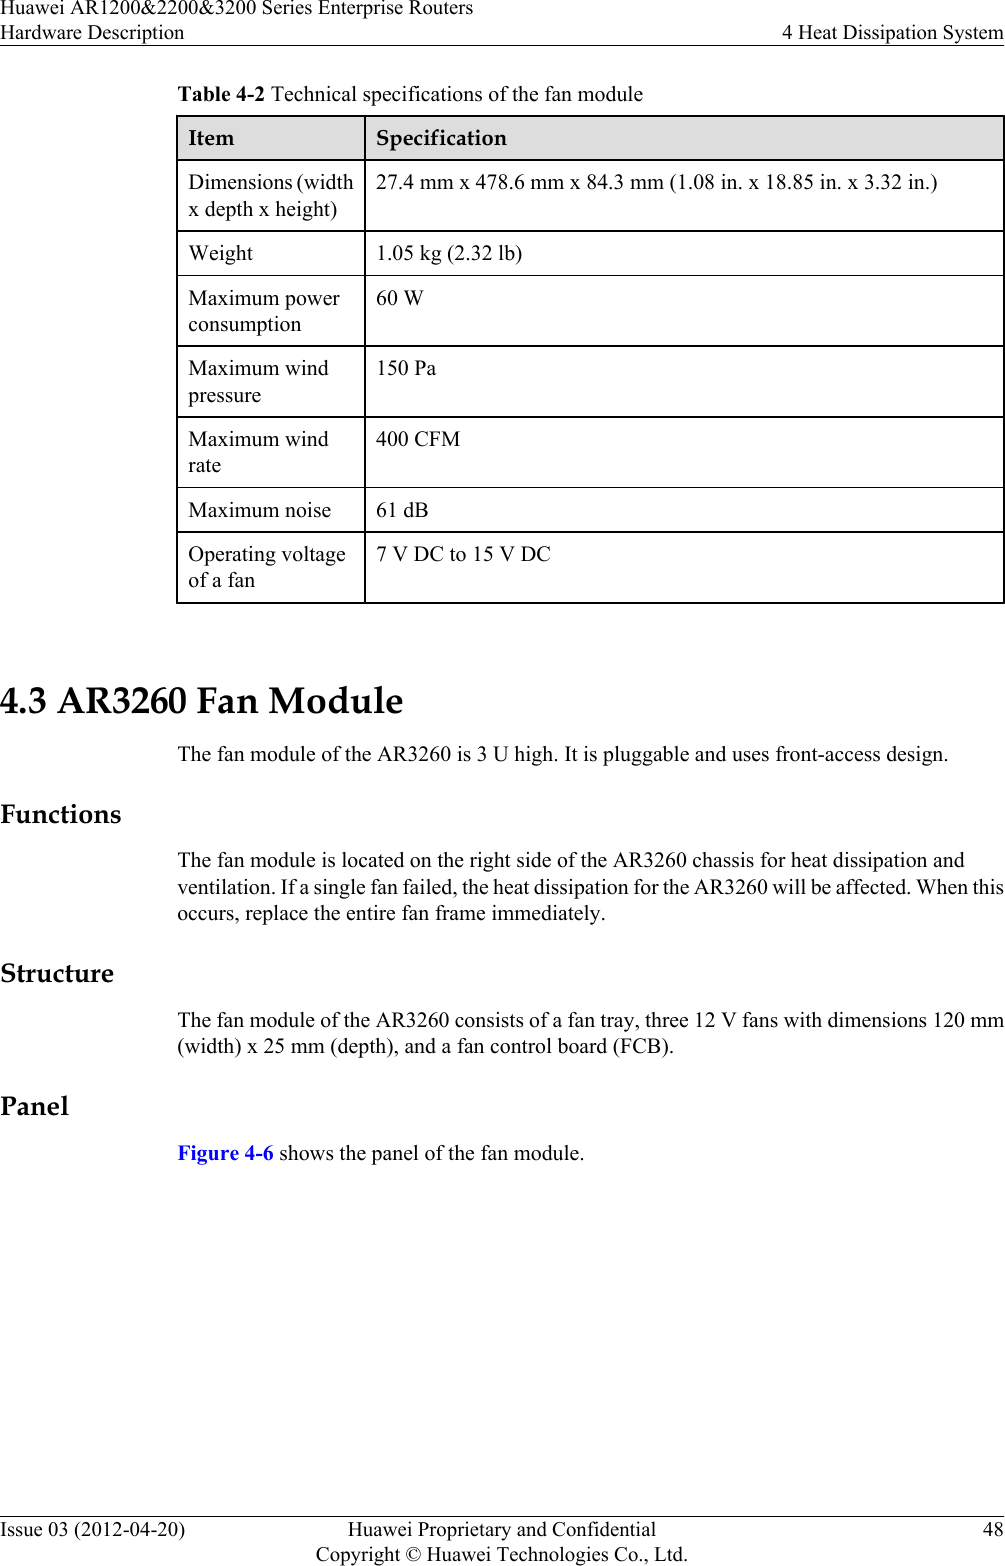 Table 4-2 Technical specifications of the fan moduleItem SpecificationDimensions (widthx depth x height)27.4 mm x 478.6 mm x 84.3 mm (1.08 in. x 18.85 in. x 3.32 in.)Weight 1.05 kg (2.32 lb)Maximum powerconsumption60 WMaximum windpressure150 PaMaximum windrate400 CFMMaximum noise 61 dBOperating voltageof a fan7 V DC to 15 V DC 4.3 AR3260 Fan ModuleThe fan module of the AR3260 is 3 U high. It is pluggable and uses front-access design.FunctionsThe fan module is located on the right side of the AR3260 chassis for heat dissipation andventilation. If a single fan failed, the heat dissipation for the AR3260 will be affected. When thisoccurs, replace the entire fan frame immediately.StructureThe fan module of the AR3260 consists of a fan tray, three 12 V fans with dimensions 120 mm(width) x 25 mm (depth), and a fan control board (FCB).PanelFigure 4-6 shows the panel of the fan module.Huawei AR1200&amp;2200&amp;3200 Series Enterprise RoutersHardware Description 4 Heat Dissipation SystemIssue 03 (2012-04-20) Huawei Proprietary and ConfidentialCopyright © Huawei Technologies Co., Ltd.48